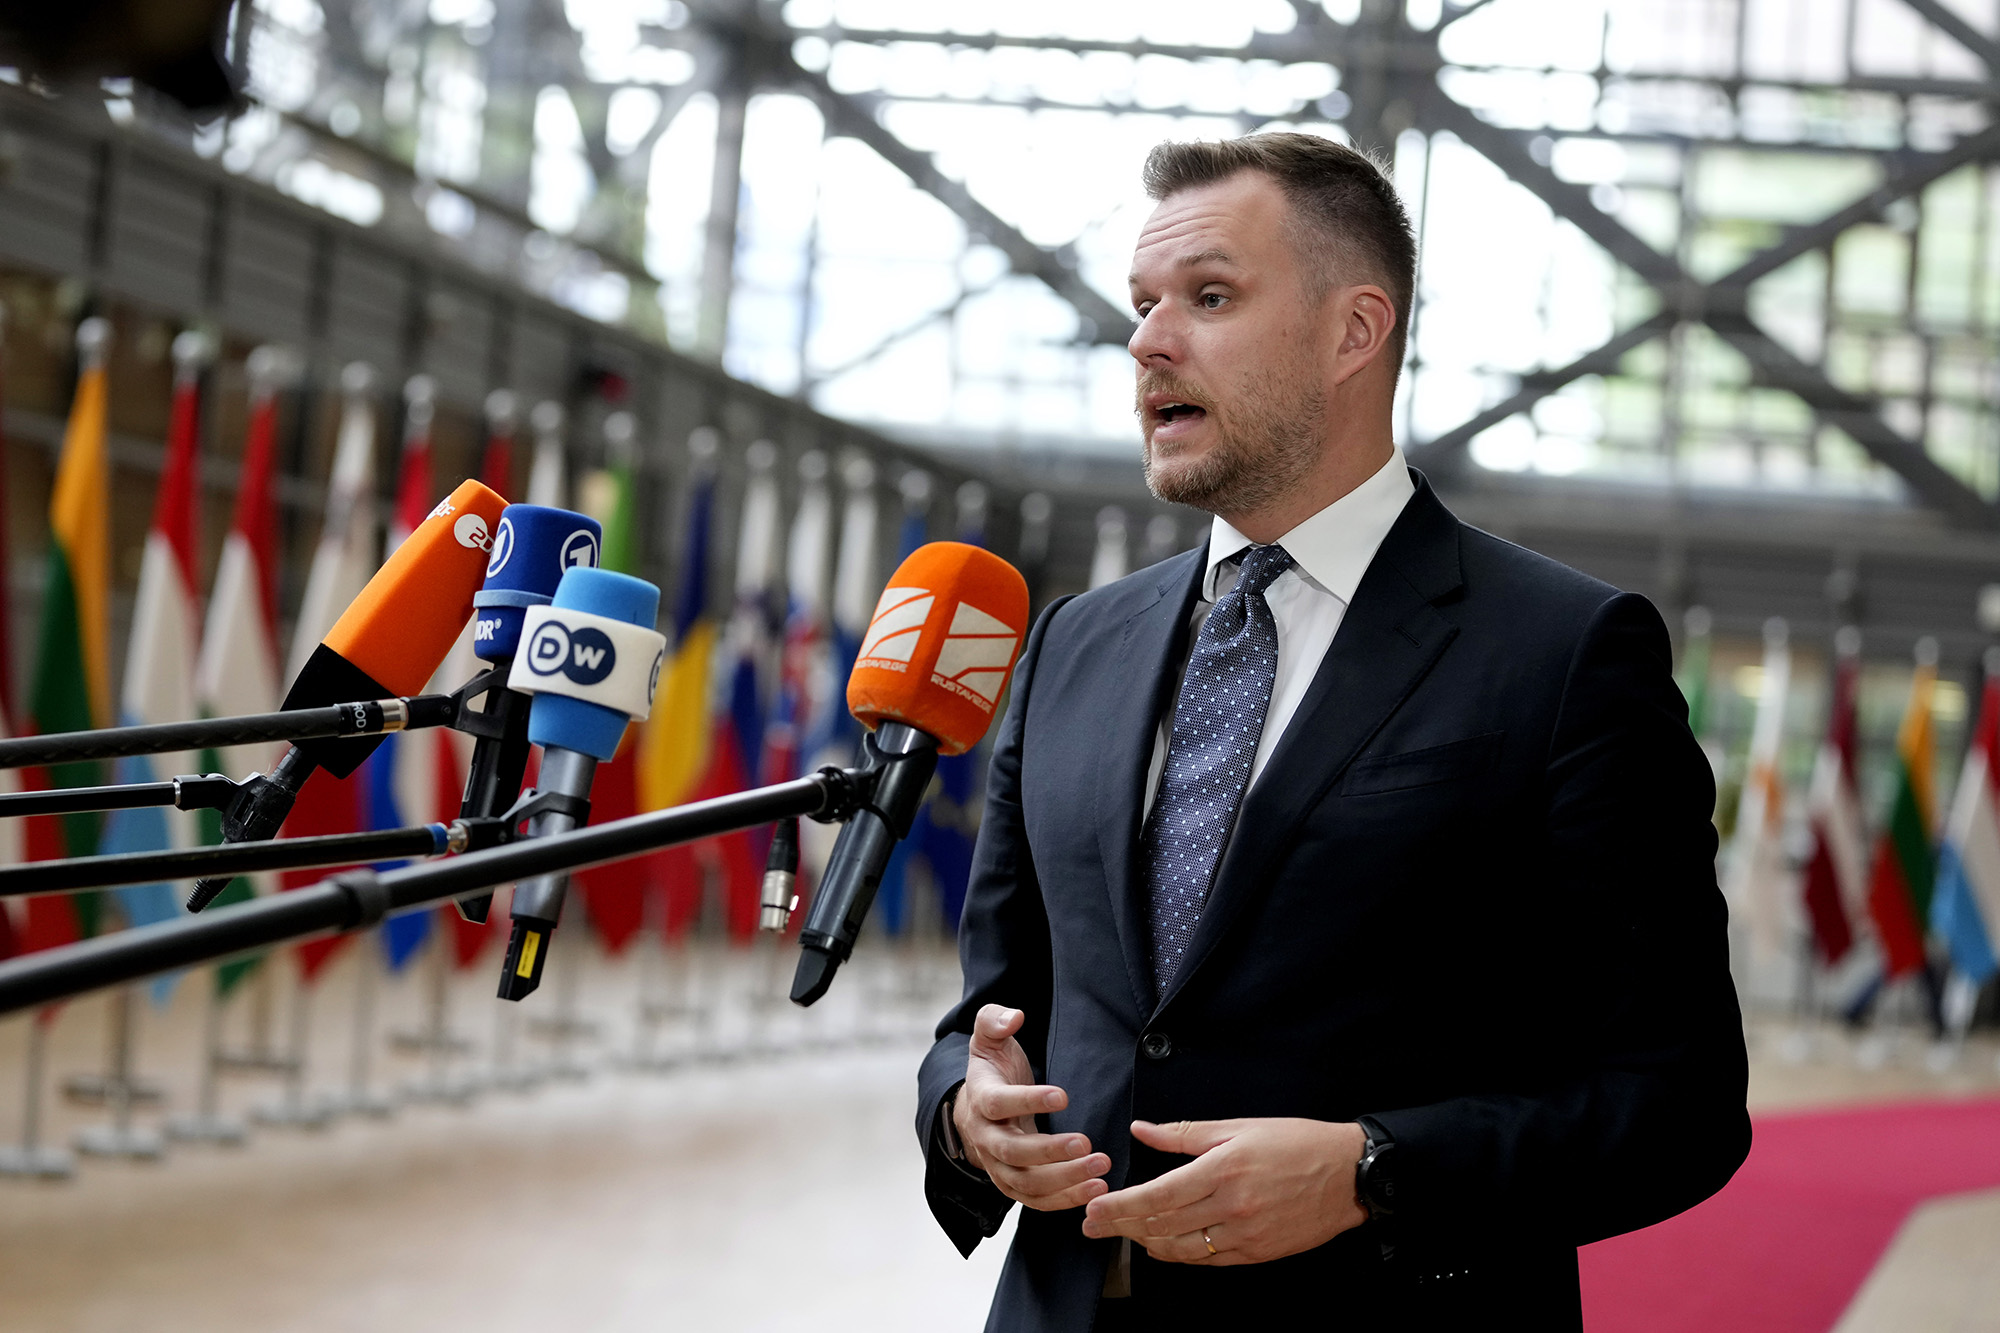 Lithuania's Foreign Minister Gabrielius Landsbergis speaks with the media as he arrives for a meeting of EU foreign ministers at the European Council building in Brussels, Belgium, on May 22.